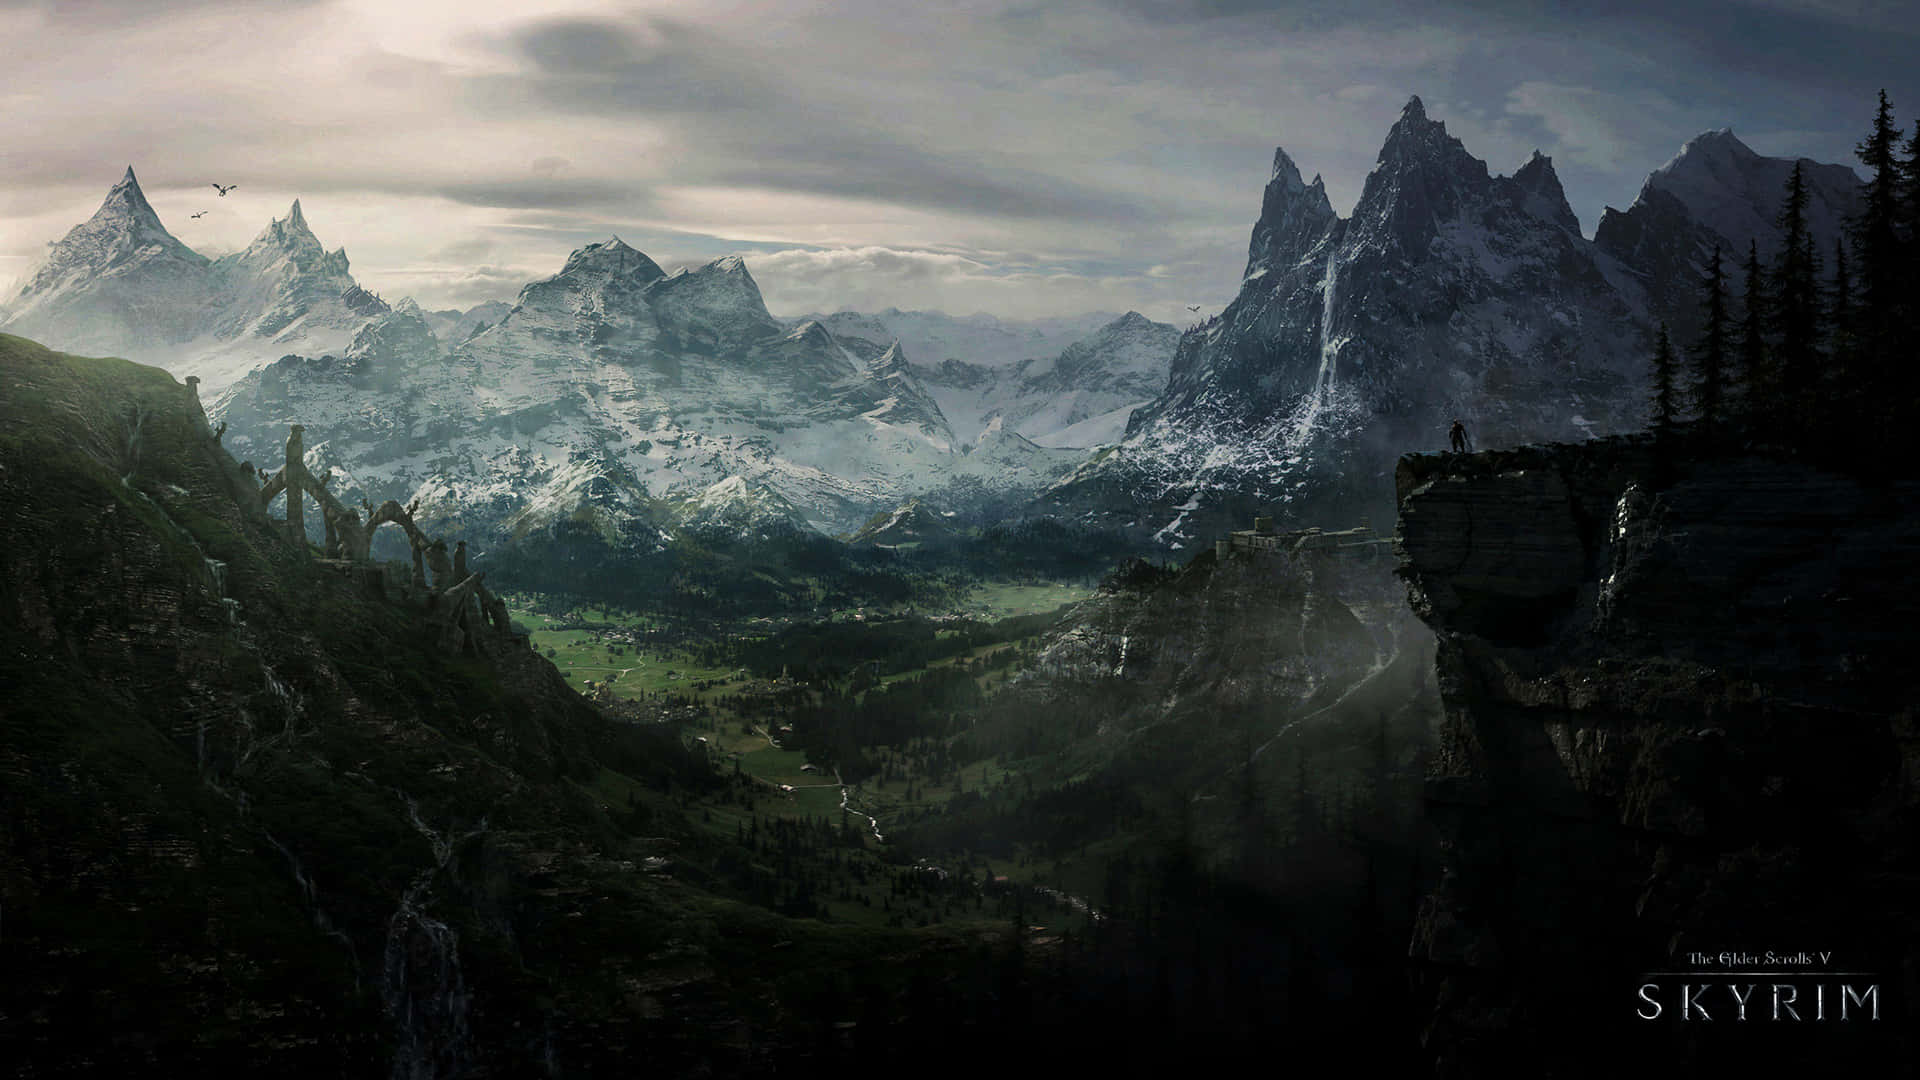 Majestic Skyrim Landscape with Dragons and Warriors